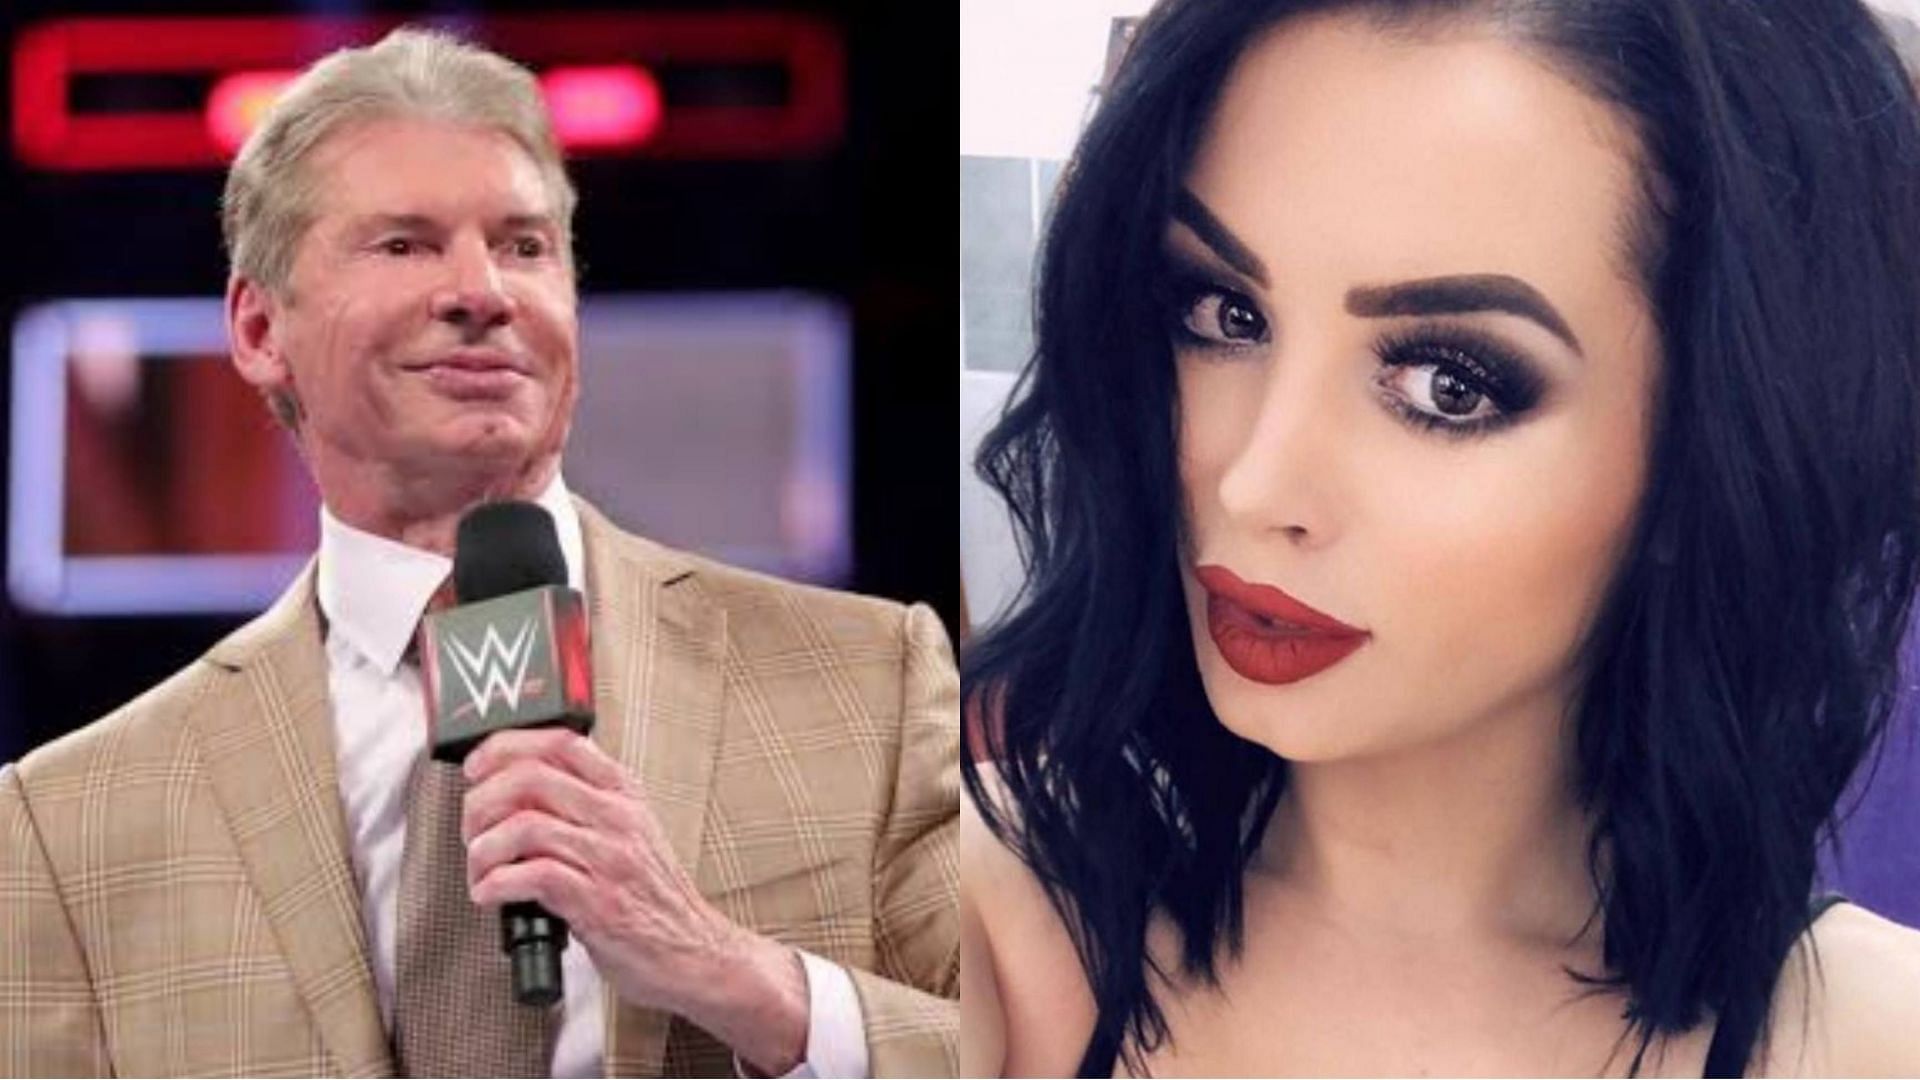 Vince McMahon (left) and Paige (right)